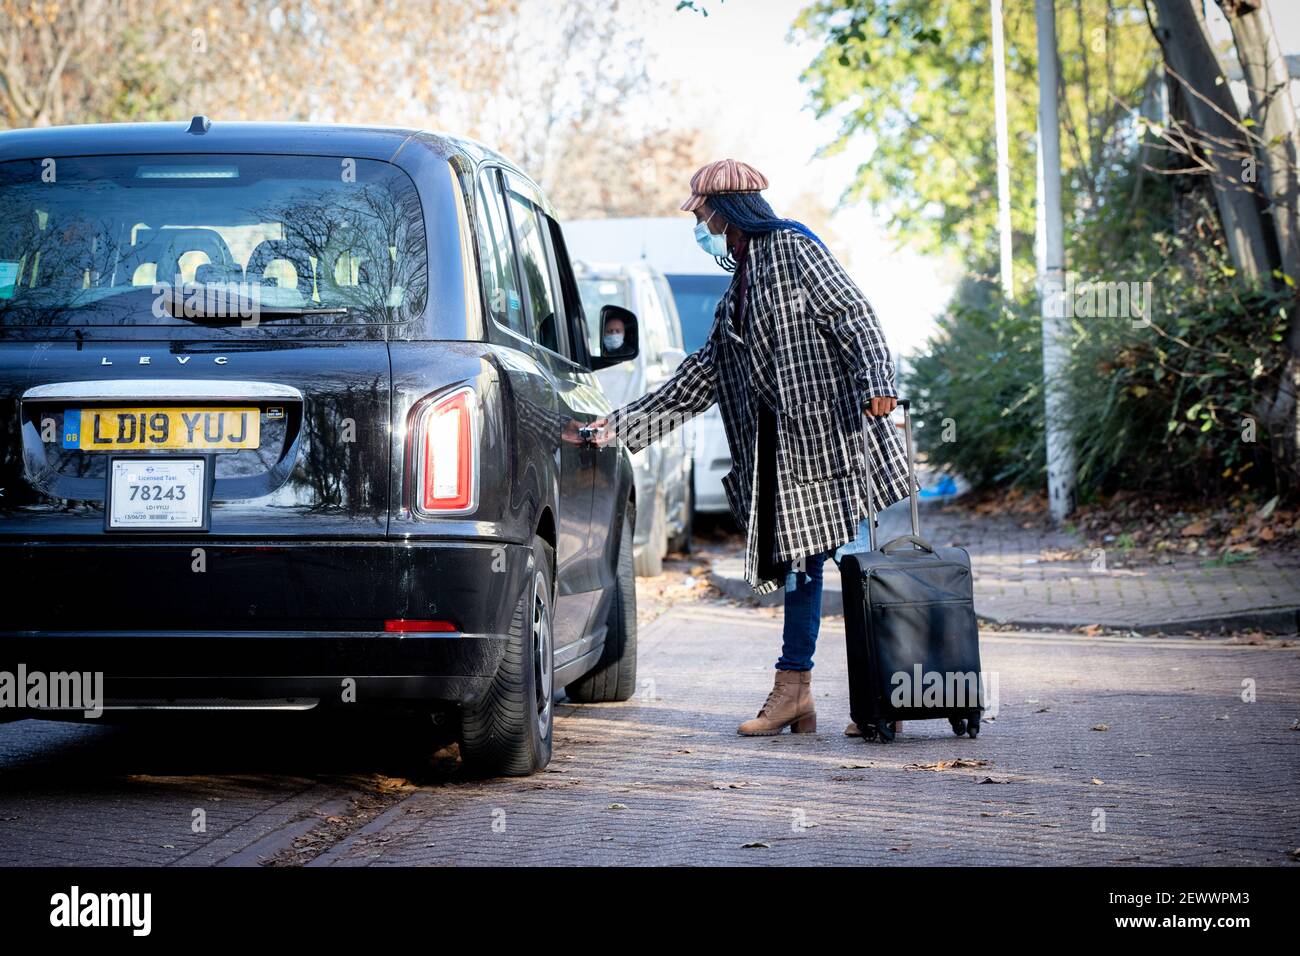 A woman uses a black cab in Canning Town, London. Stock Photo